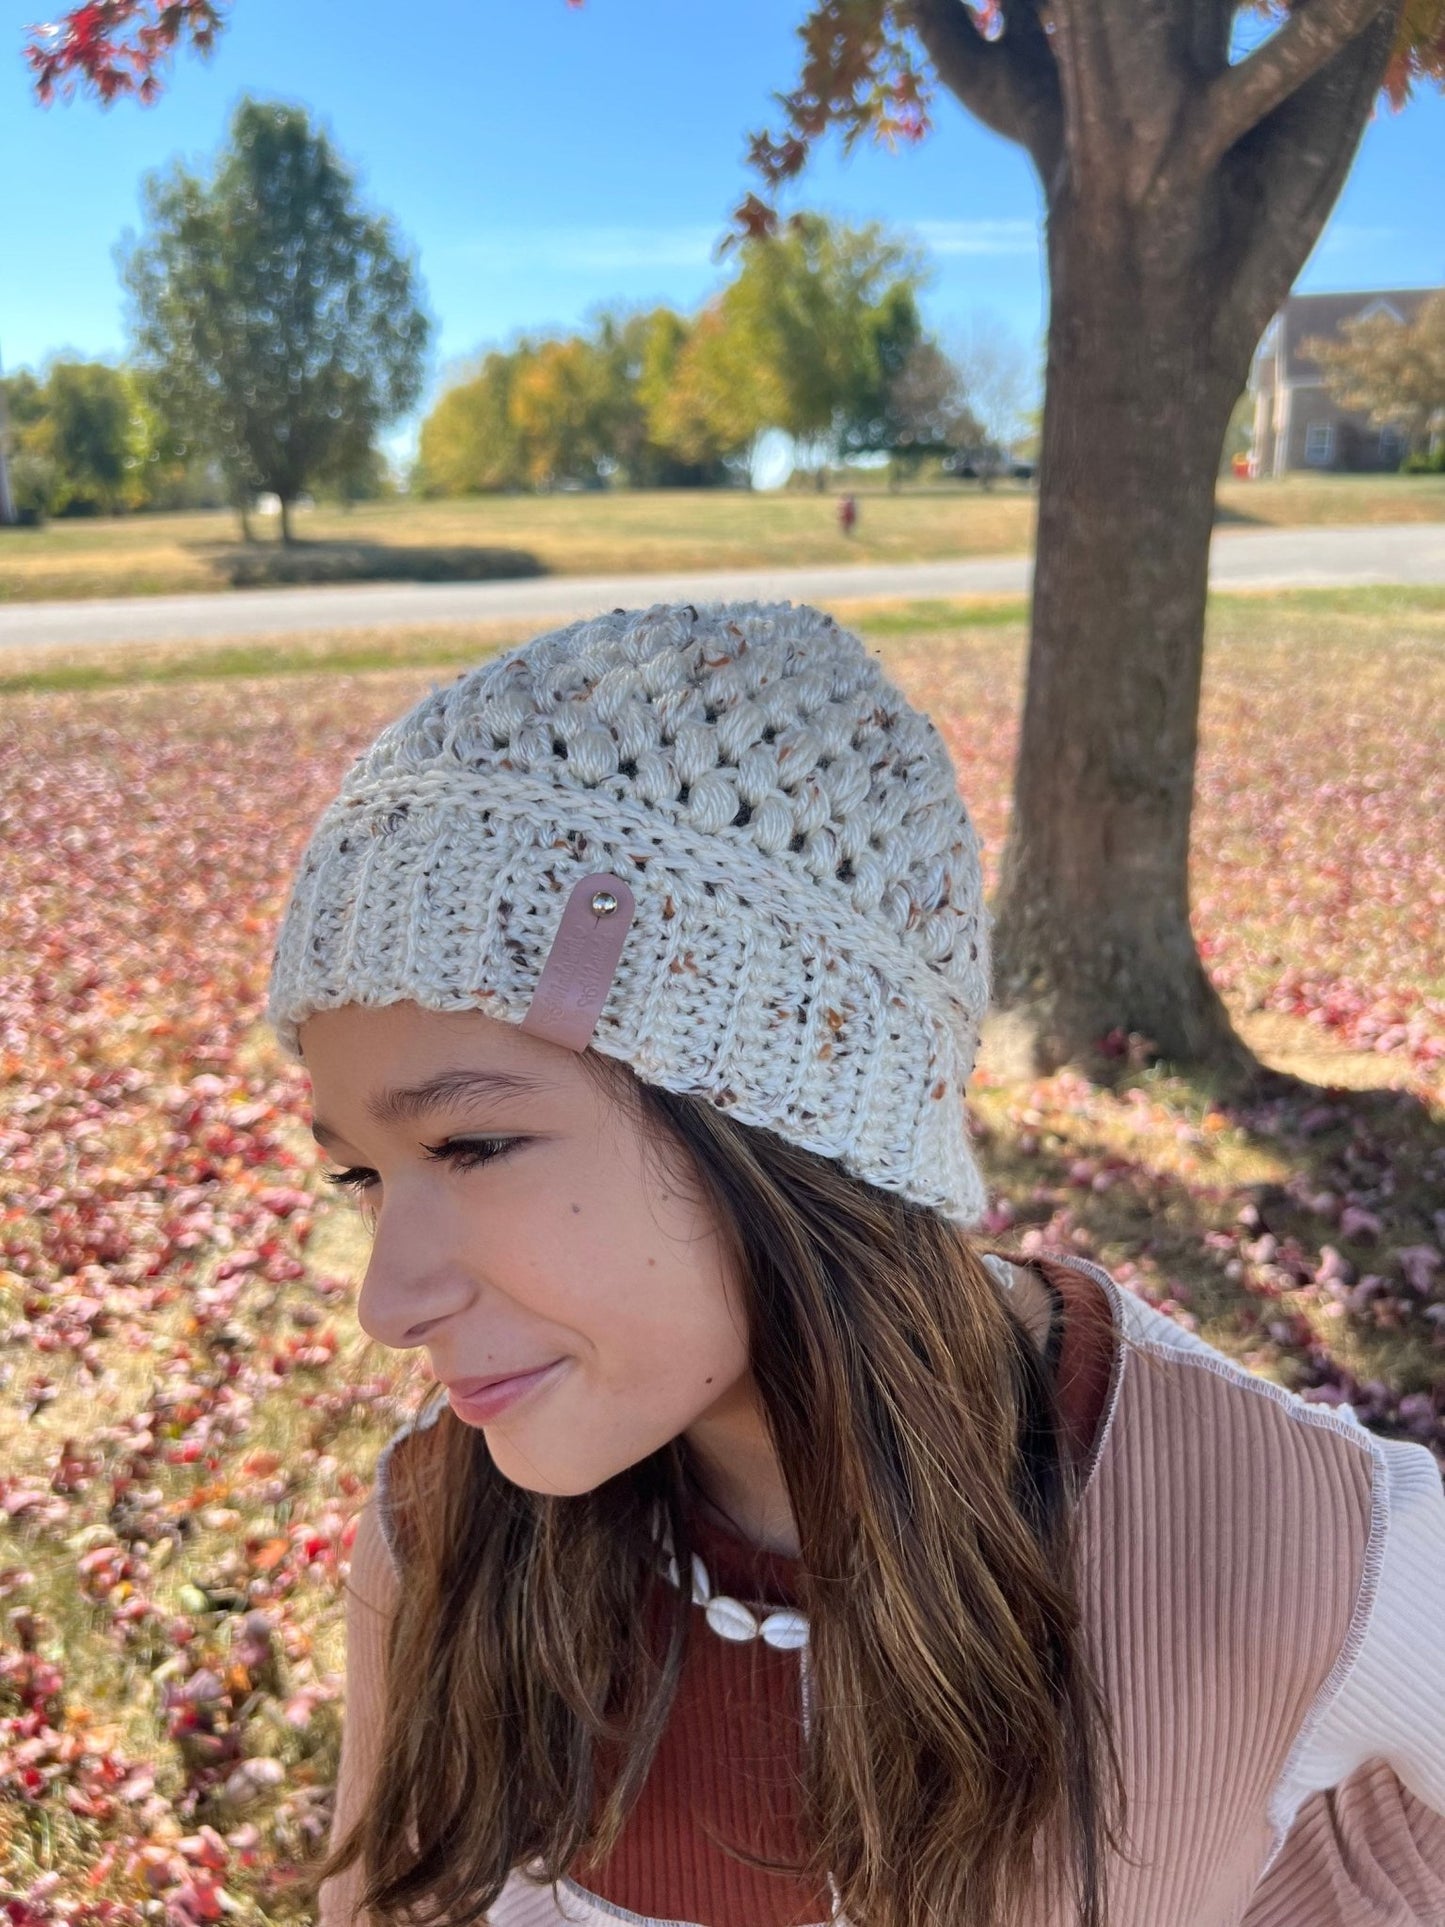 Crochet hat for girl, fall or winter weather hat - Lilly Grace Sparkle Boutique